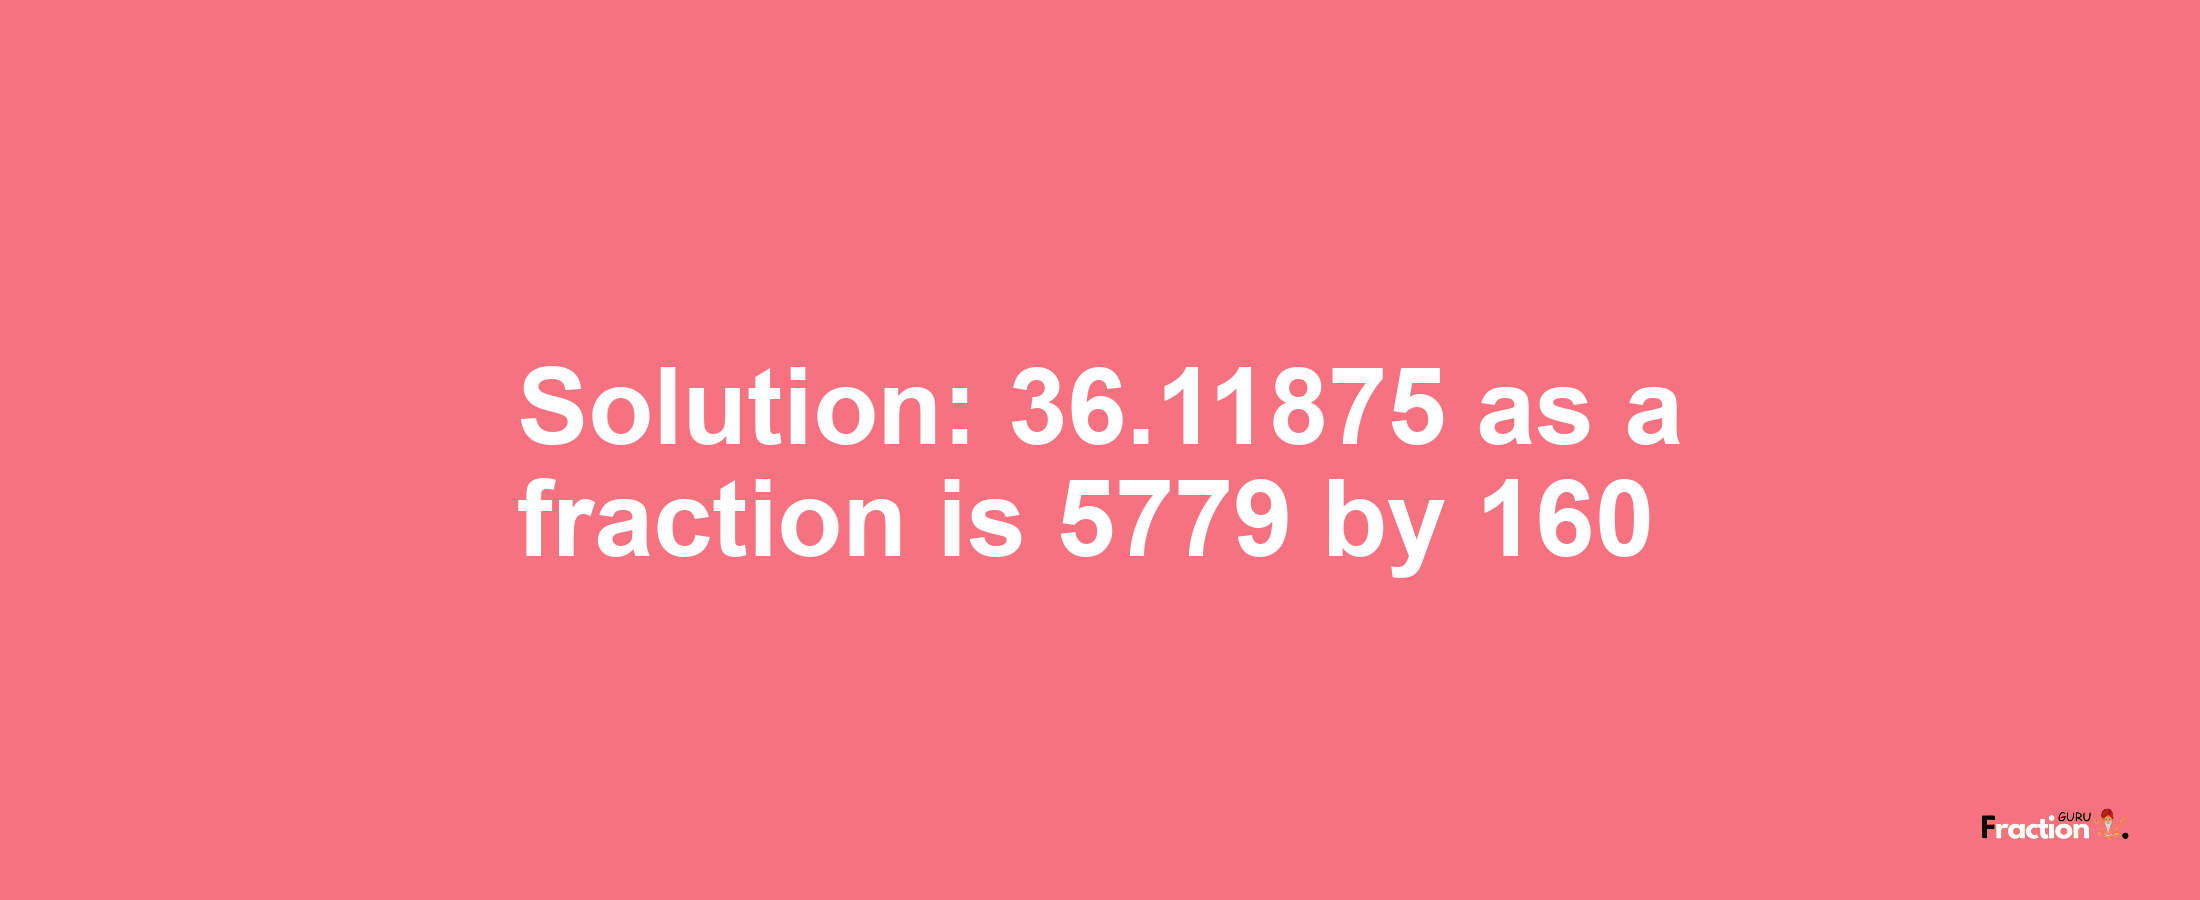 Solution:36.11875 as a fraction is 5779/160